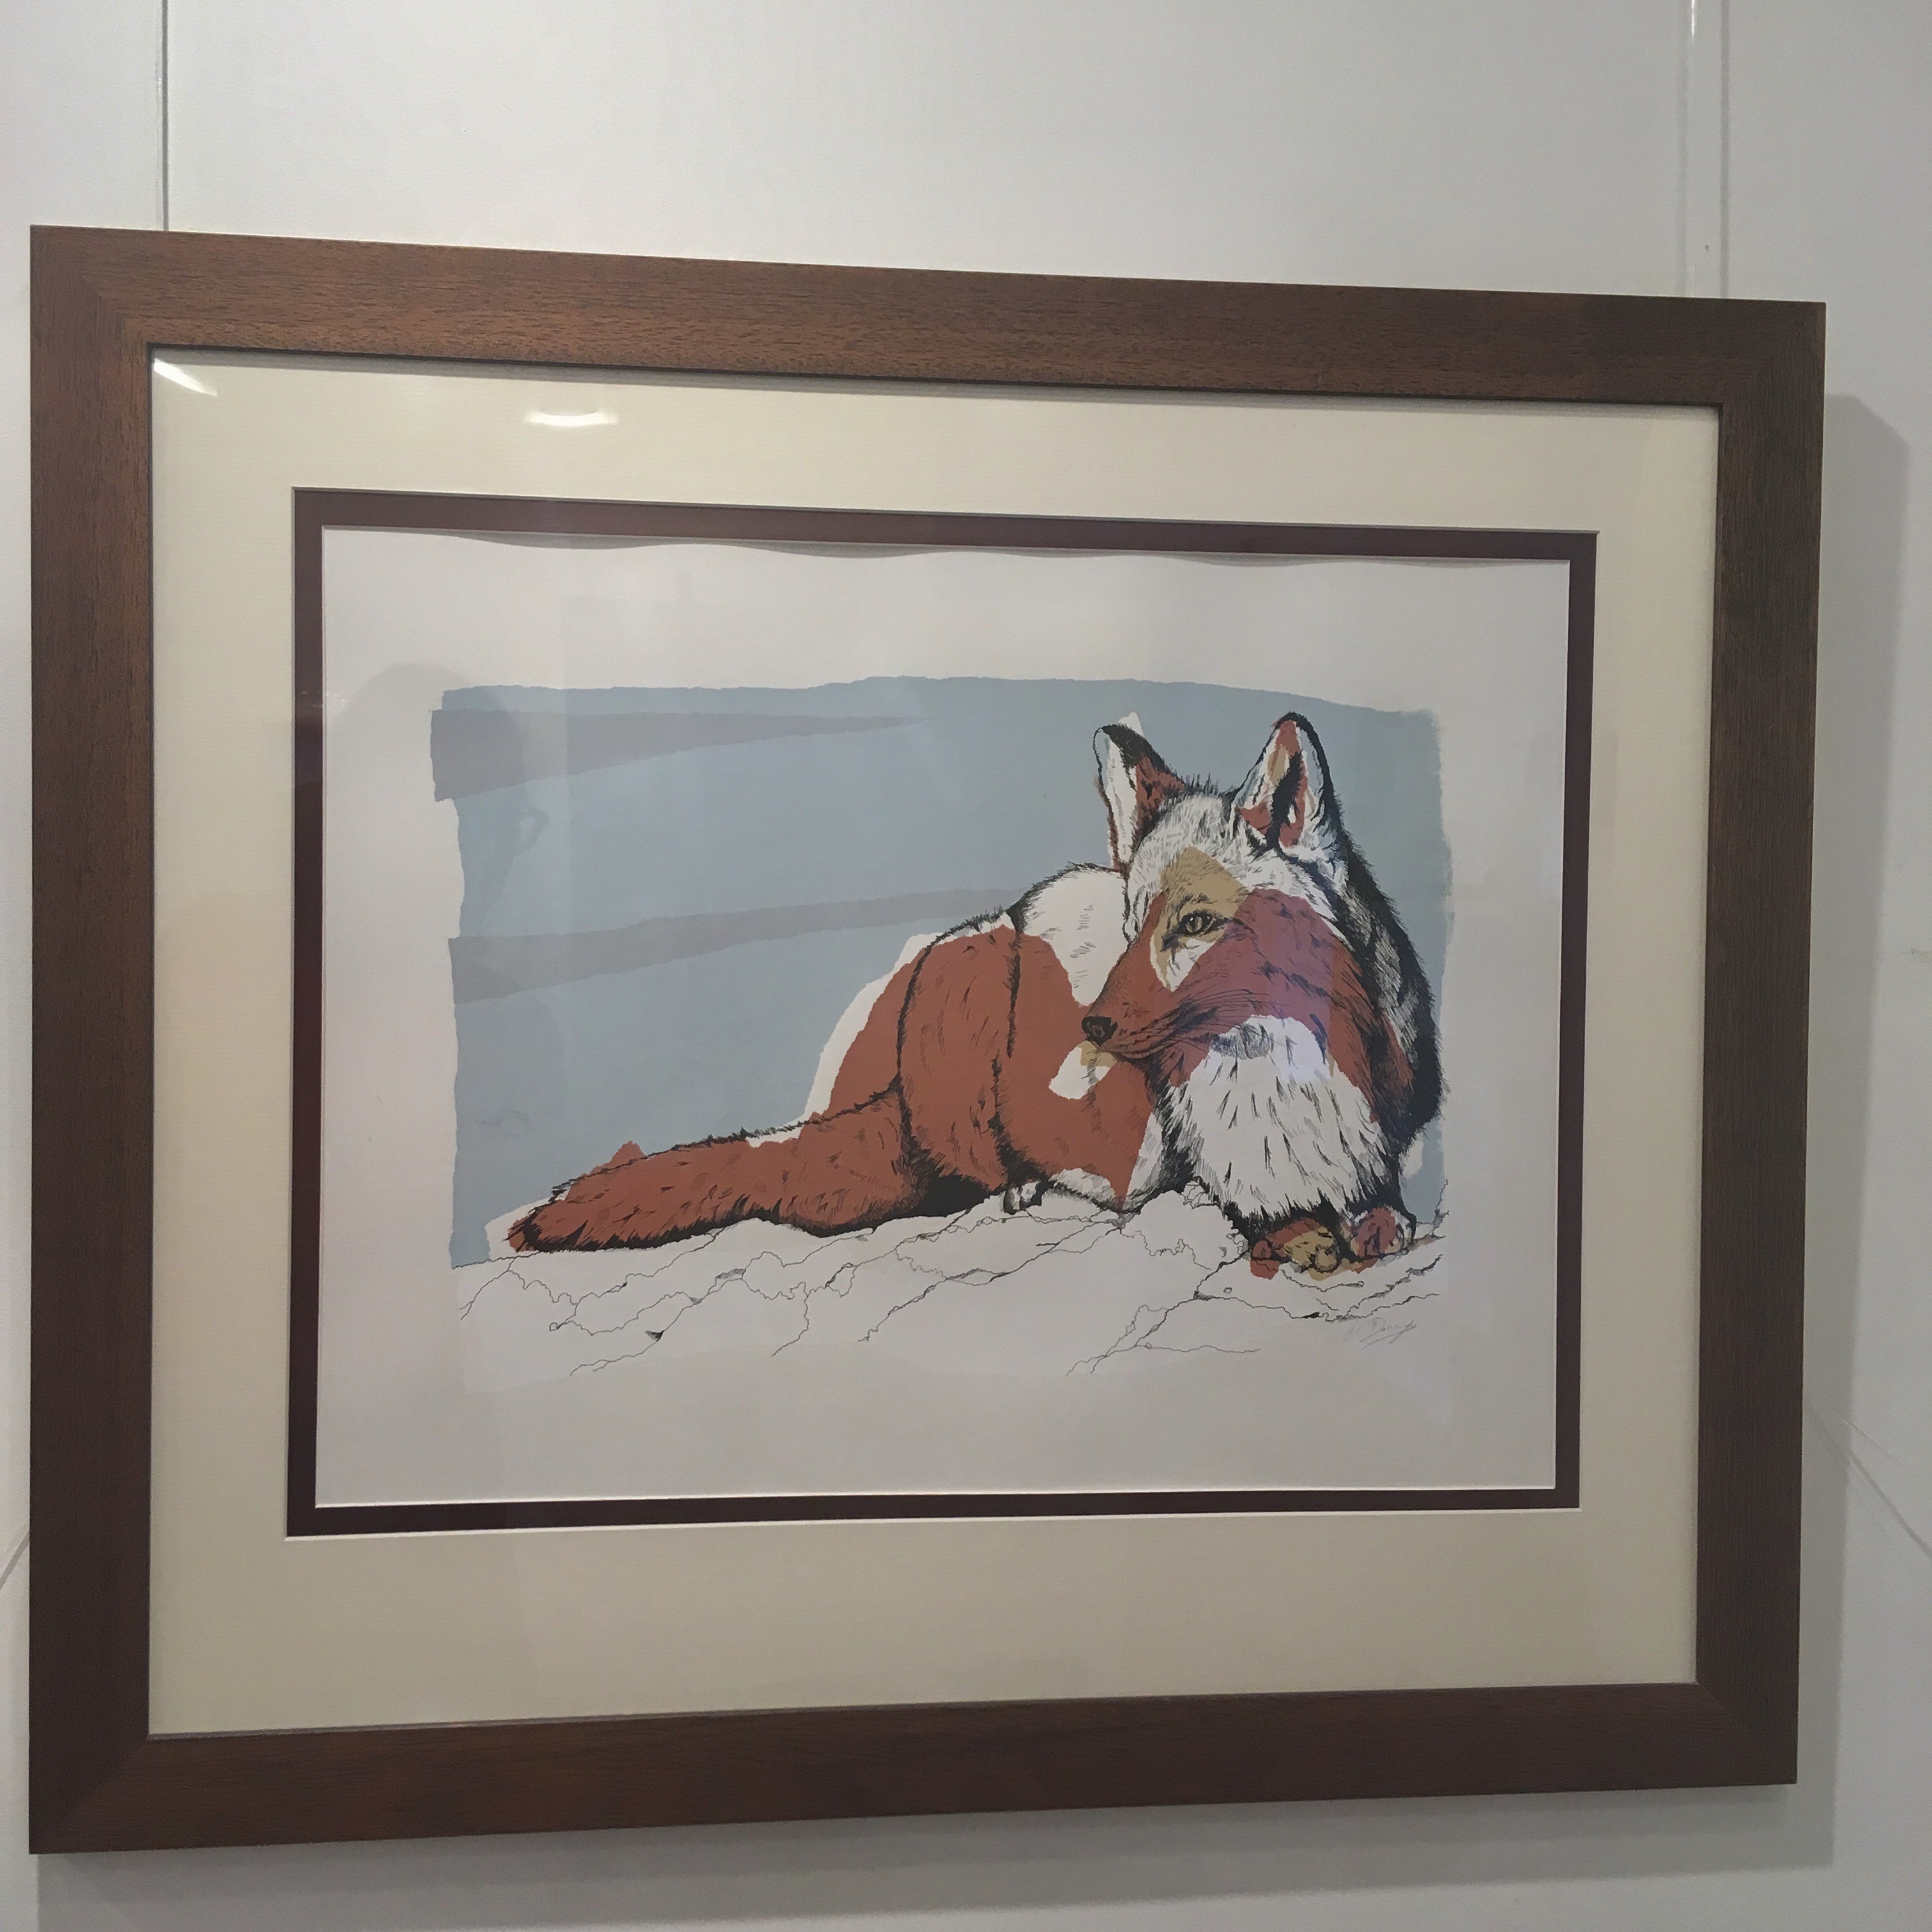 ''Foxy' - Original Screenprint with Pen and Ink' by artist Joanna Mcdonough